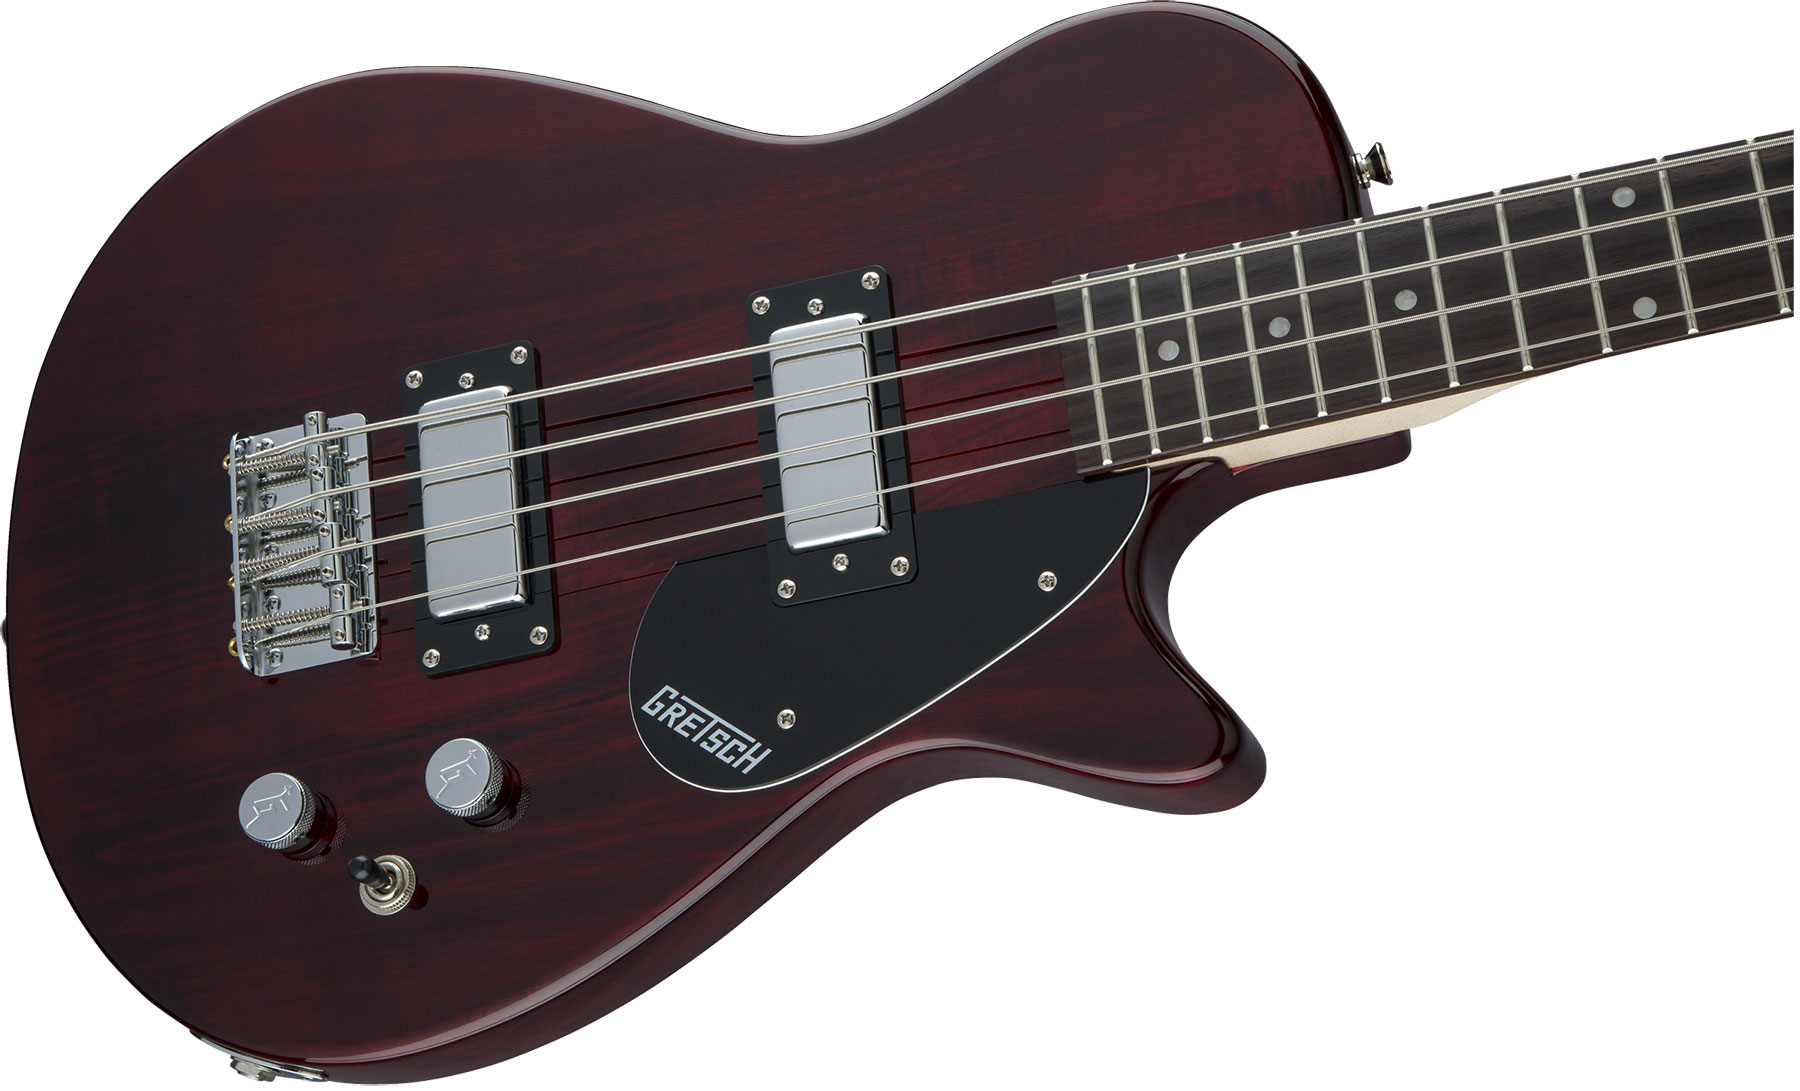 Gretsch G2220 Junior Jet Bass Ii Short Scale Electromatic Wal - Walnut Stain - Electric bass for kids - Variation 2